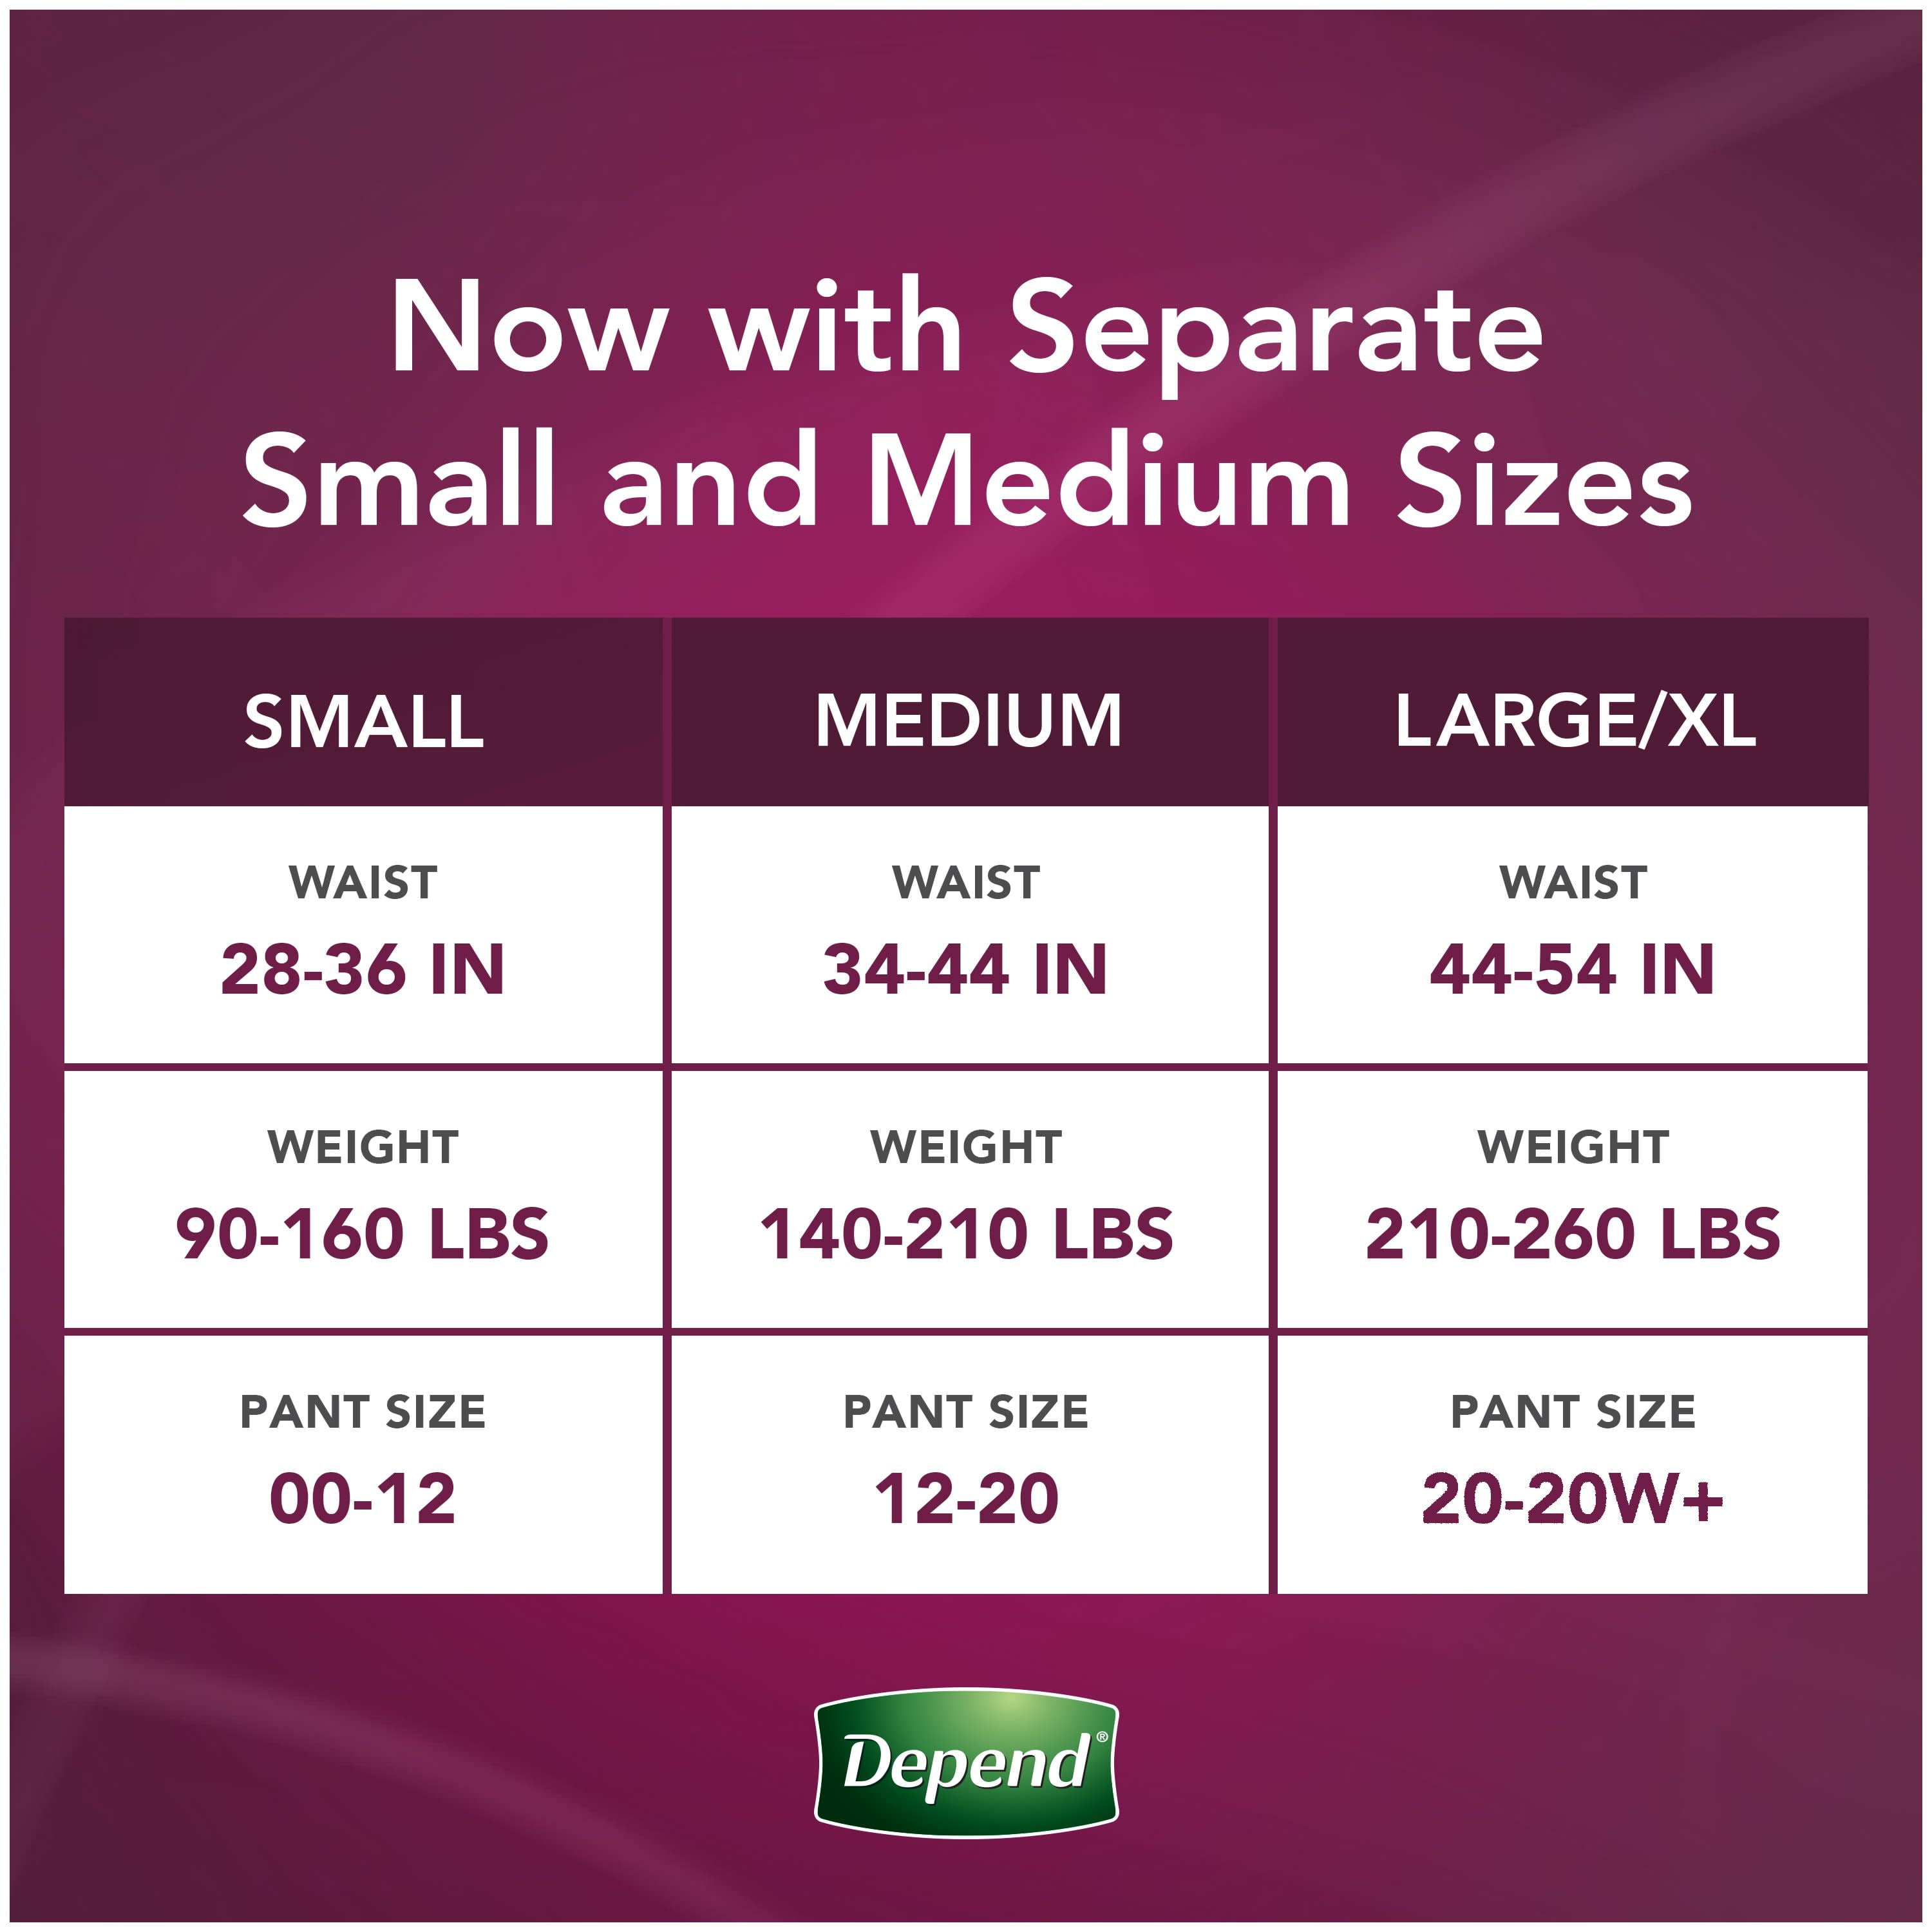 Personally, I fluctuate between sizes 12-16 and M-1x. Depends on the